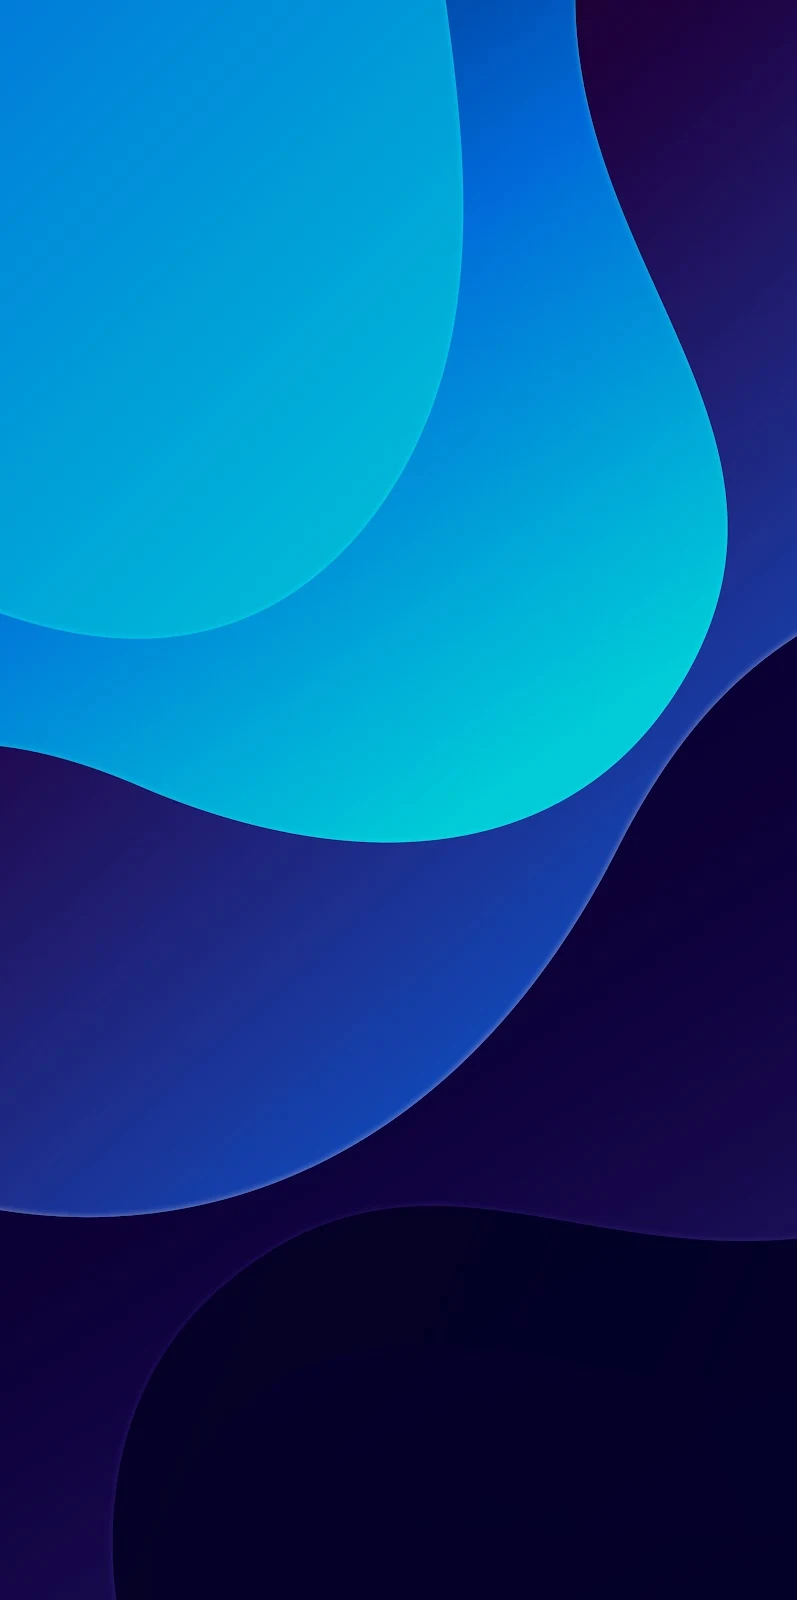 A Cool Minimal, Blue, Aqua, Electric Blue, Tints And Shades 4K iPhone Wallpaper for Free Download in High Quality [2739x5500]